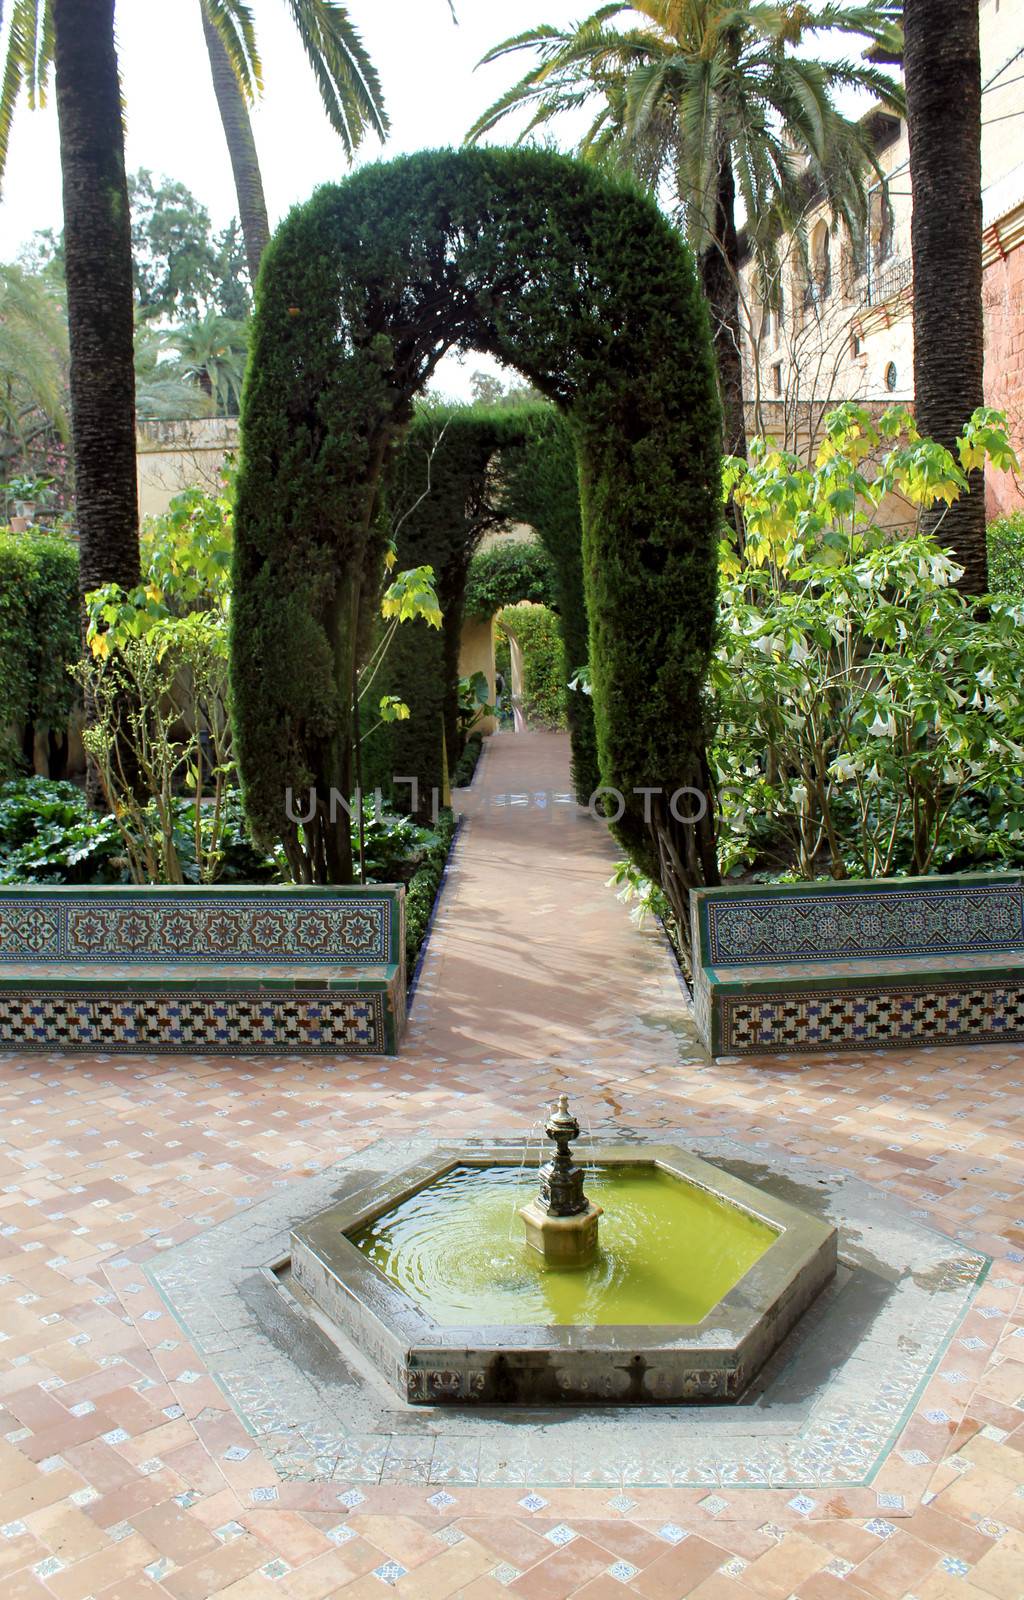 Water feature at the Real Alcazar Moorish Palace in Seville by ptxgarfield